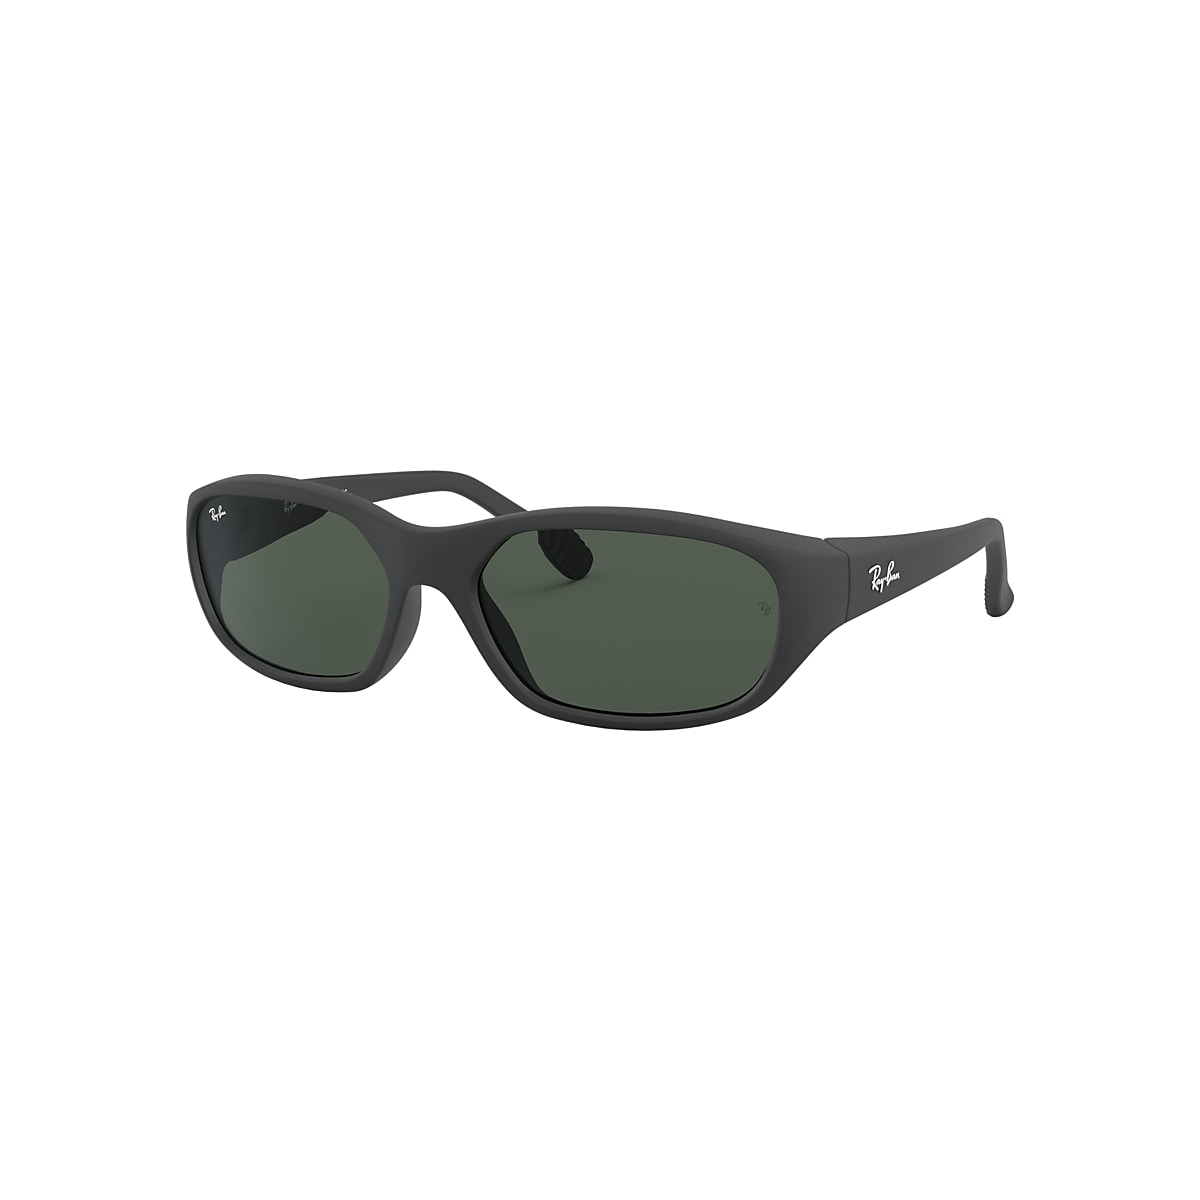 Solaires RAY-BAN pour Femme ou Homme  RB3016 901/58 CLUBMASTER - Clin  d'Oeil Cluny